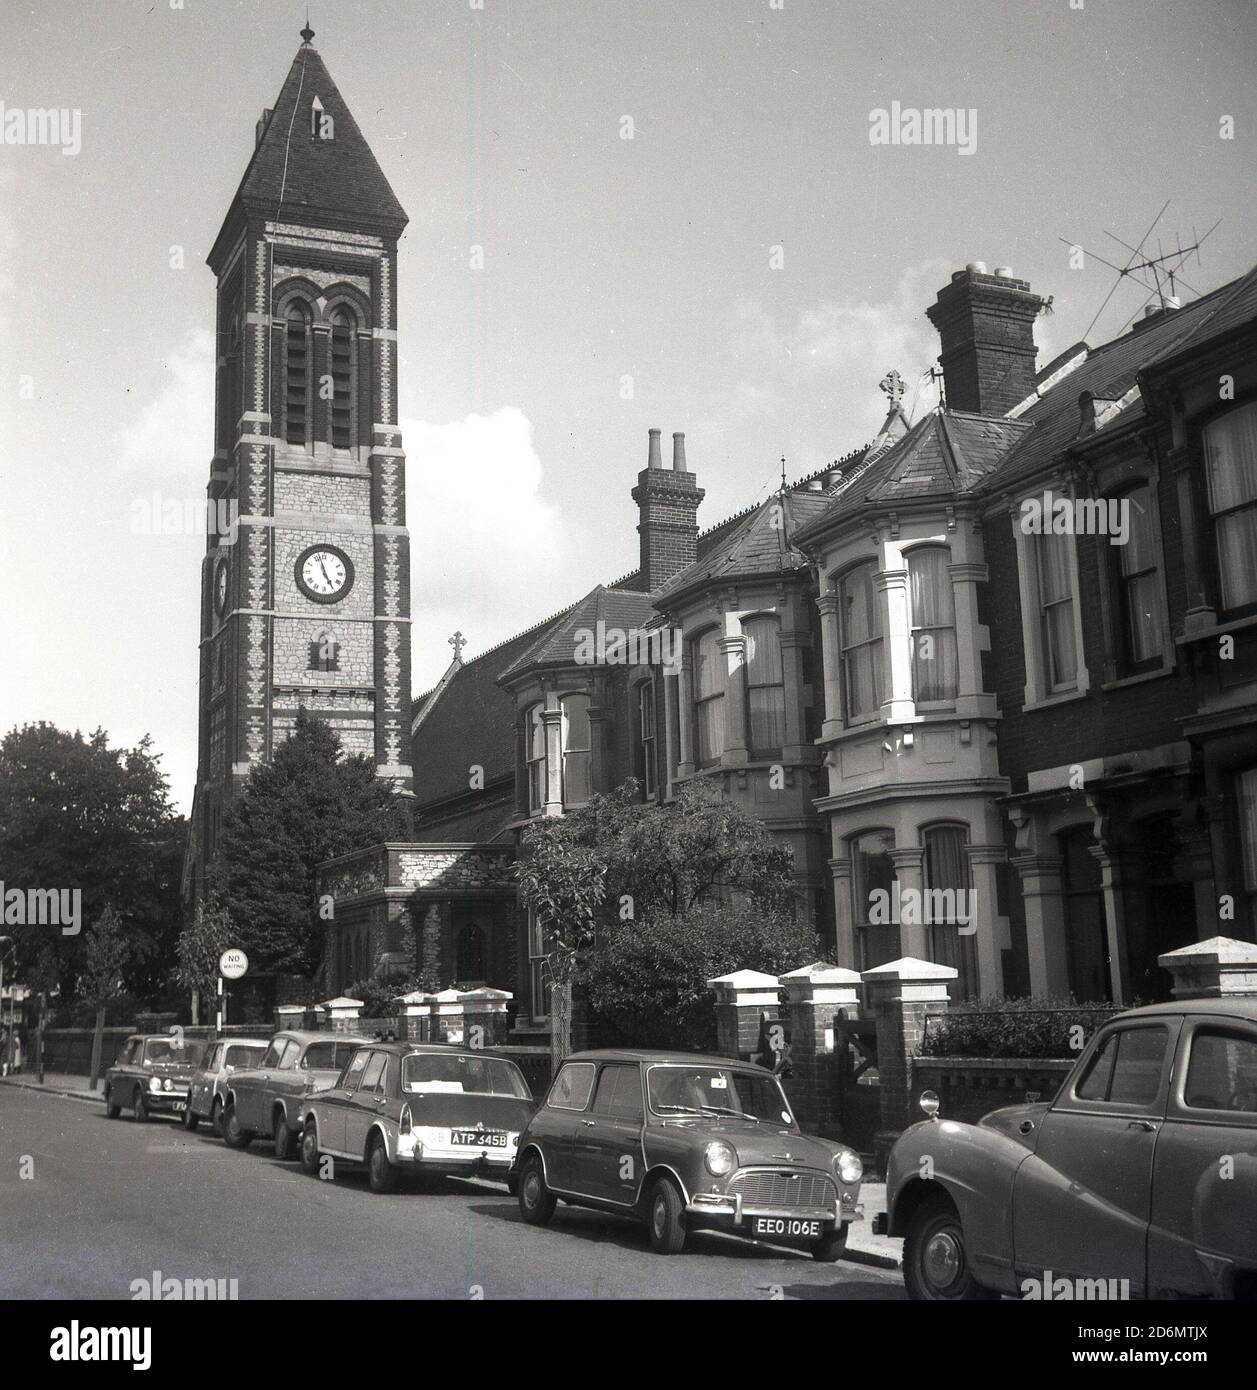 1970s, historical, South East London, Suburban street with cars of the era parked and church tower with clock. Stock Photo